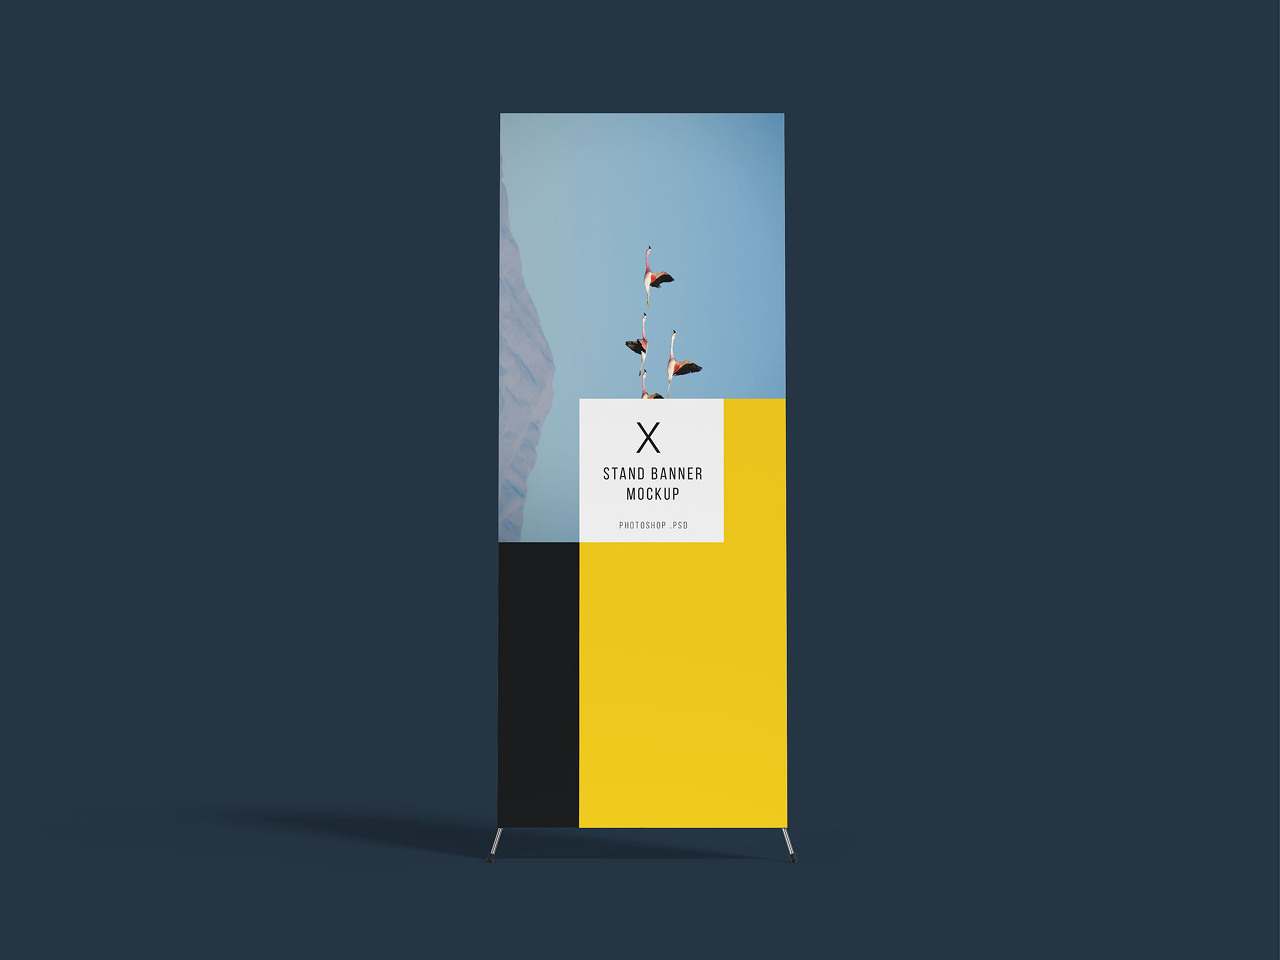 Download X-Stand Banner Mockup(X배너 목업)